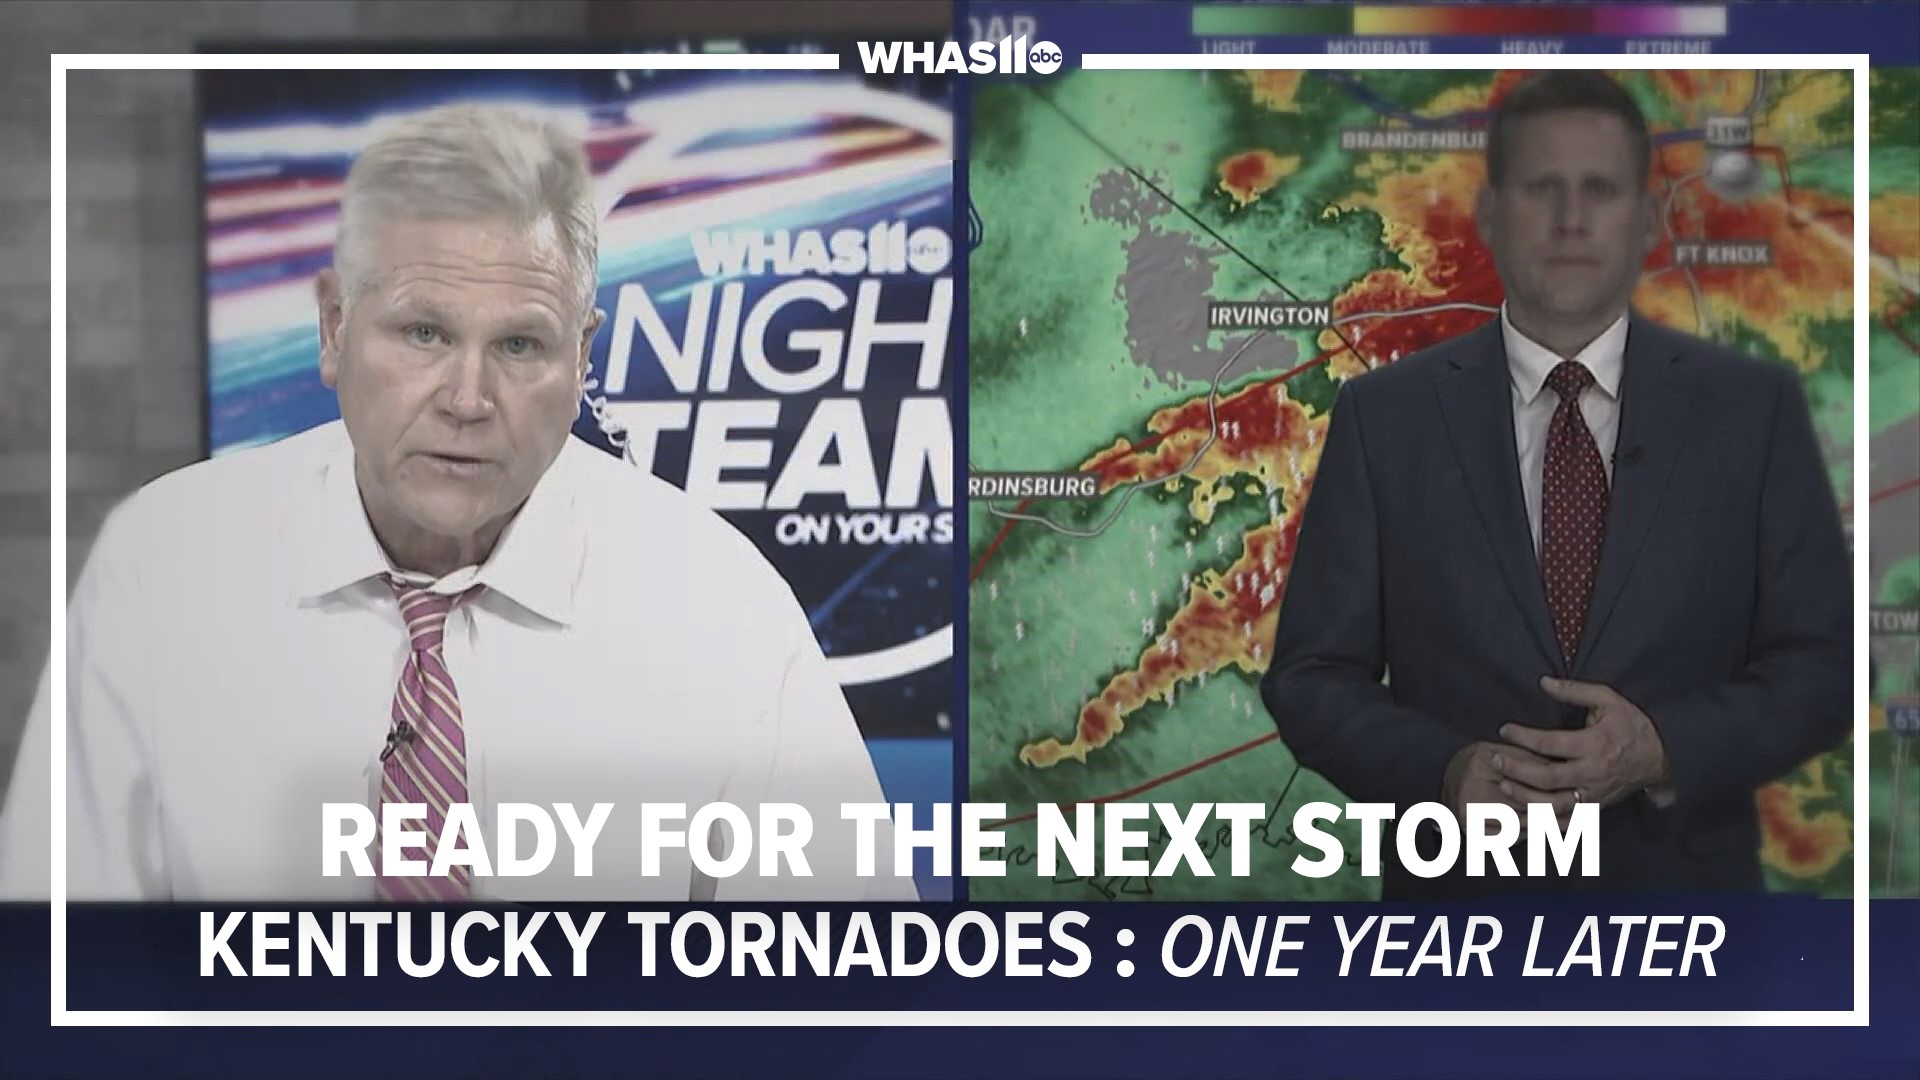 Chief Meteorologist Ben Pine recounts what happened leading up to the night deadly tornadoes struck western Kentucky one year ago.